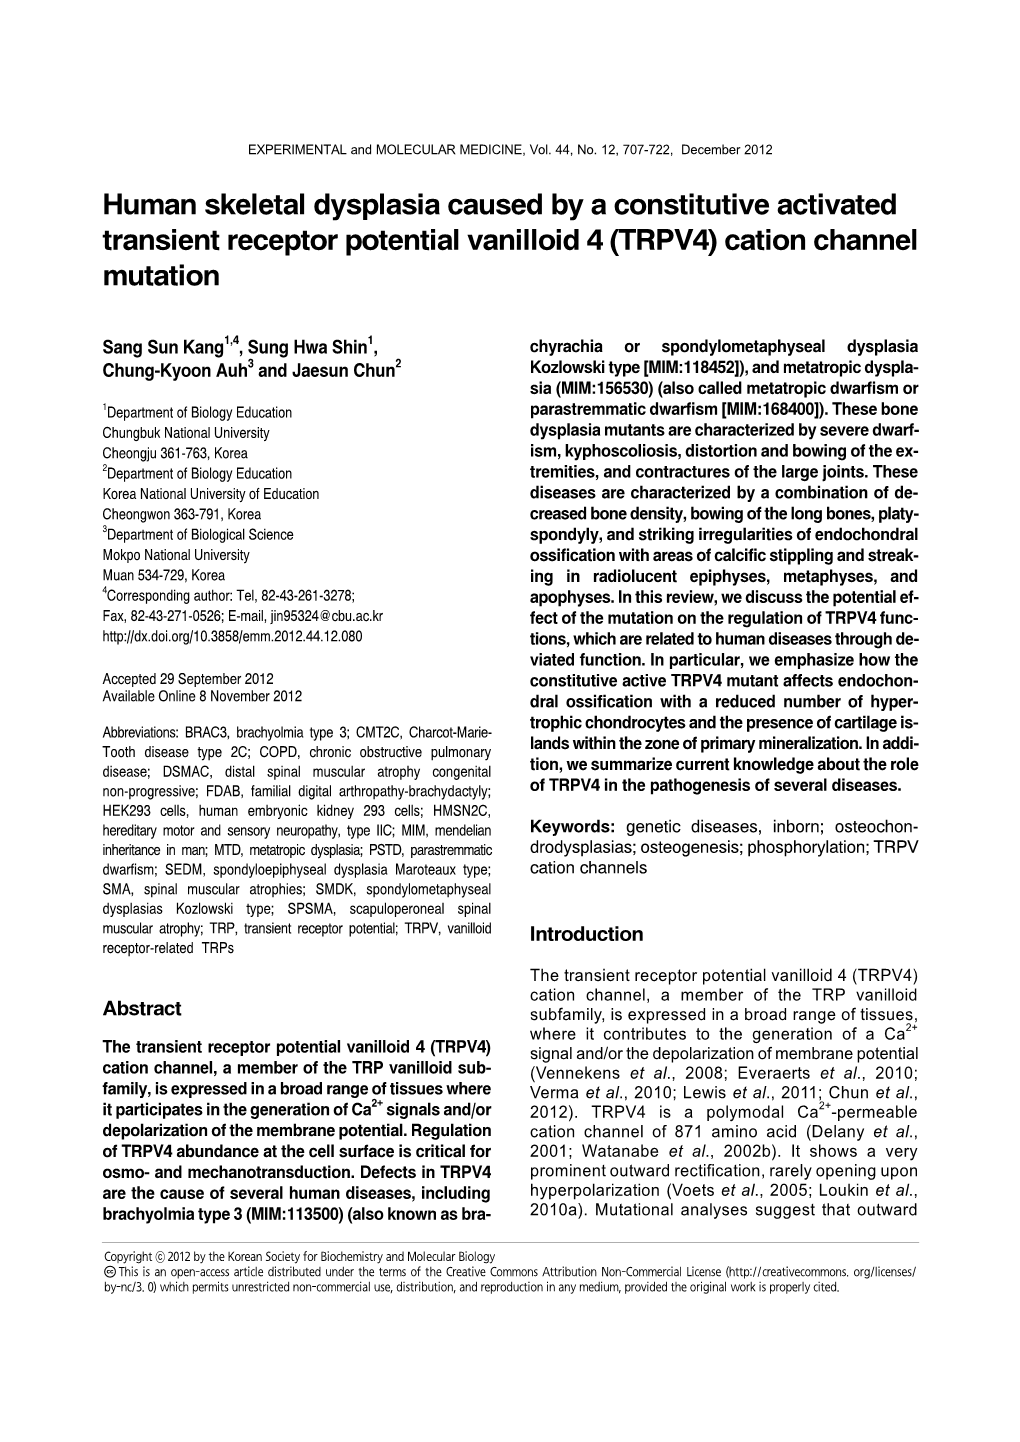 Human Skeletal Dysplasia Caused by a Constitutive Activated Transient Receptor Potential Vanilloid 4 (TRPV4) Cation Channel Mutation